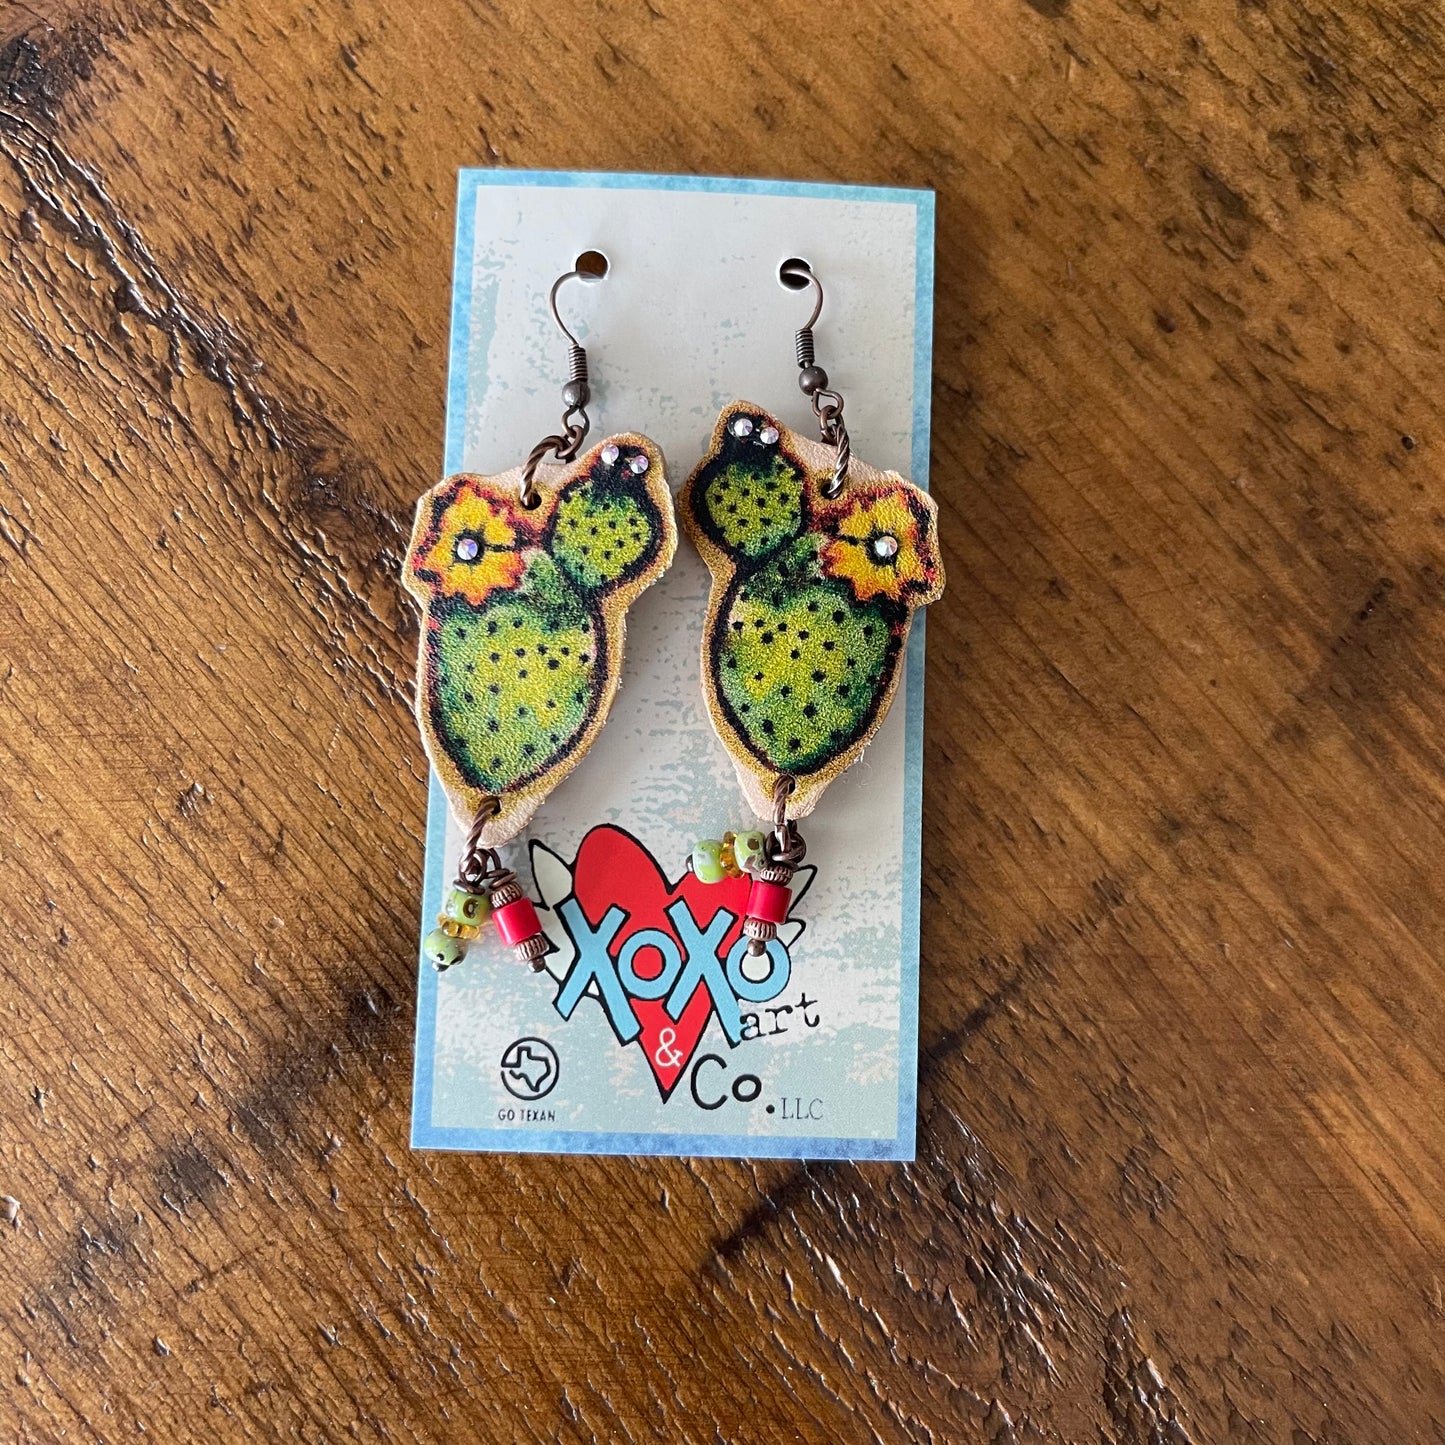 Jewelry Prickly Pear Leather Earrings Green Beads & Swarovski Crystals